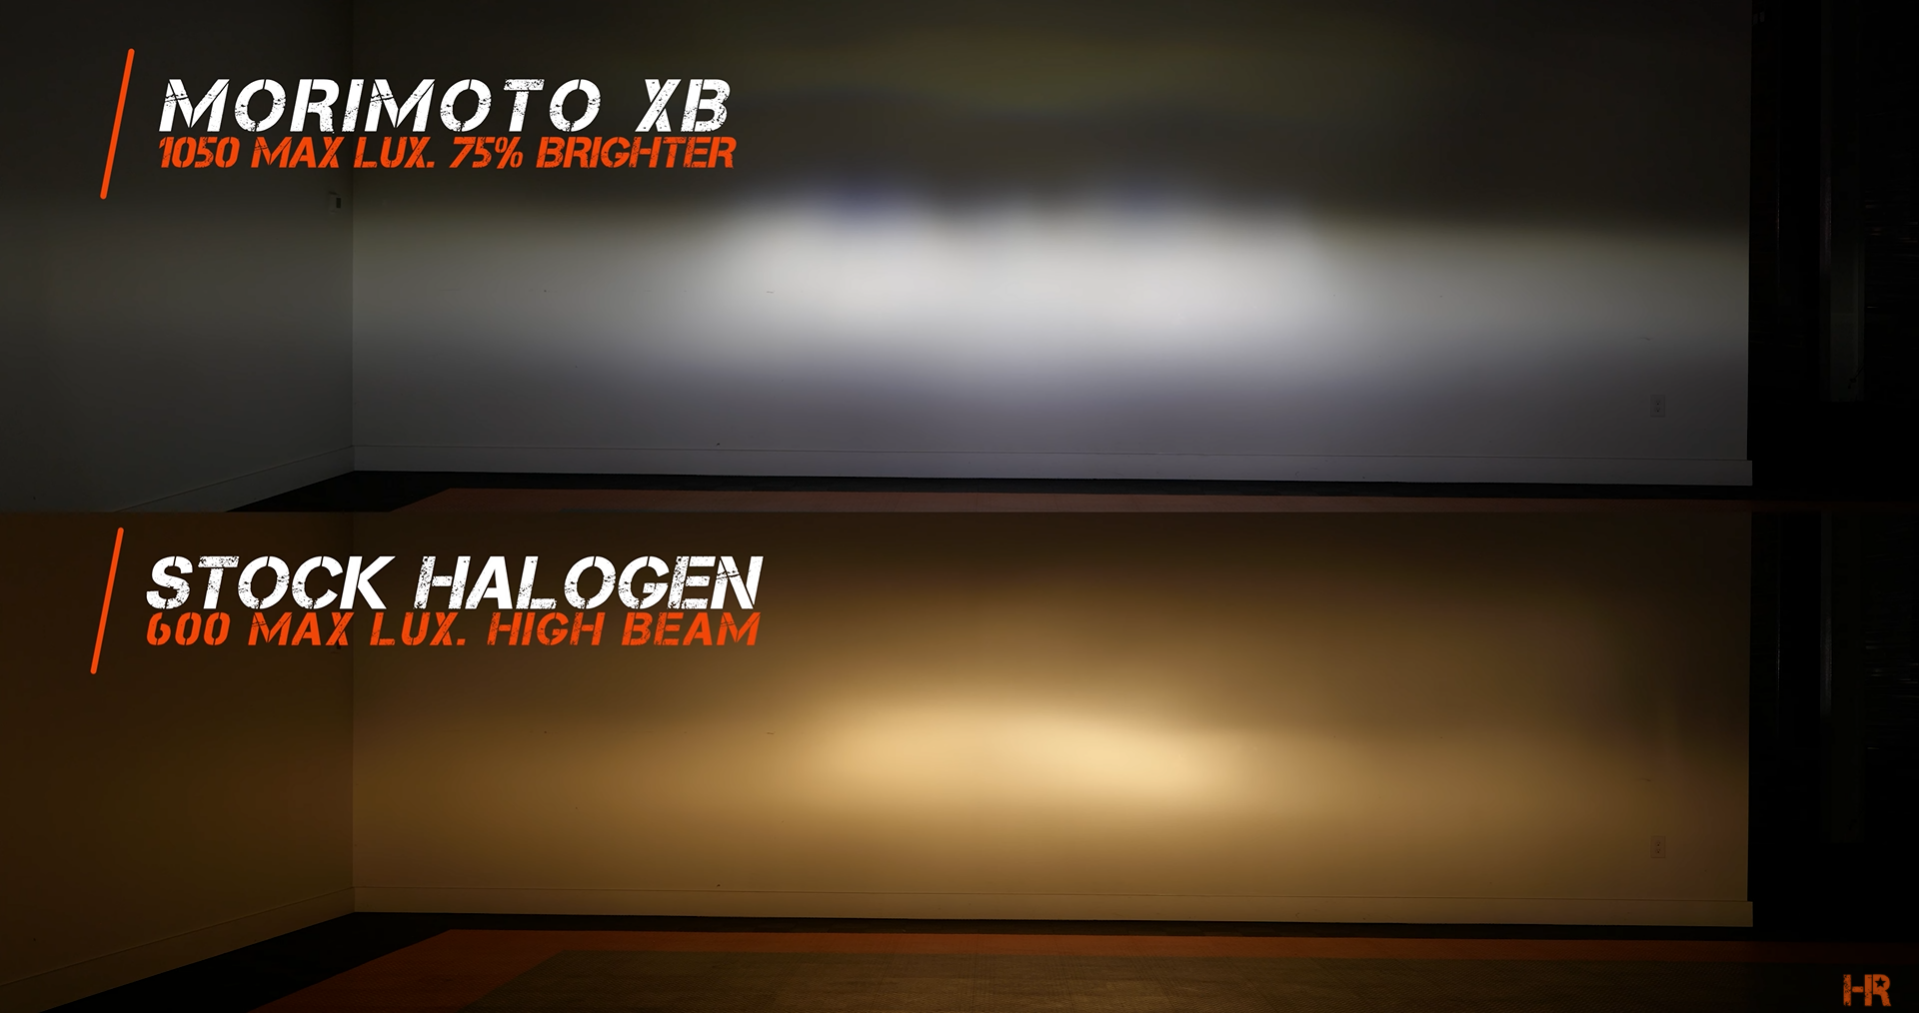 A comparison of the beam pattern between the OEM Ford Ranger halogen headlight and the Morimoto XB LED headlight.